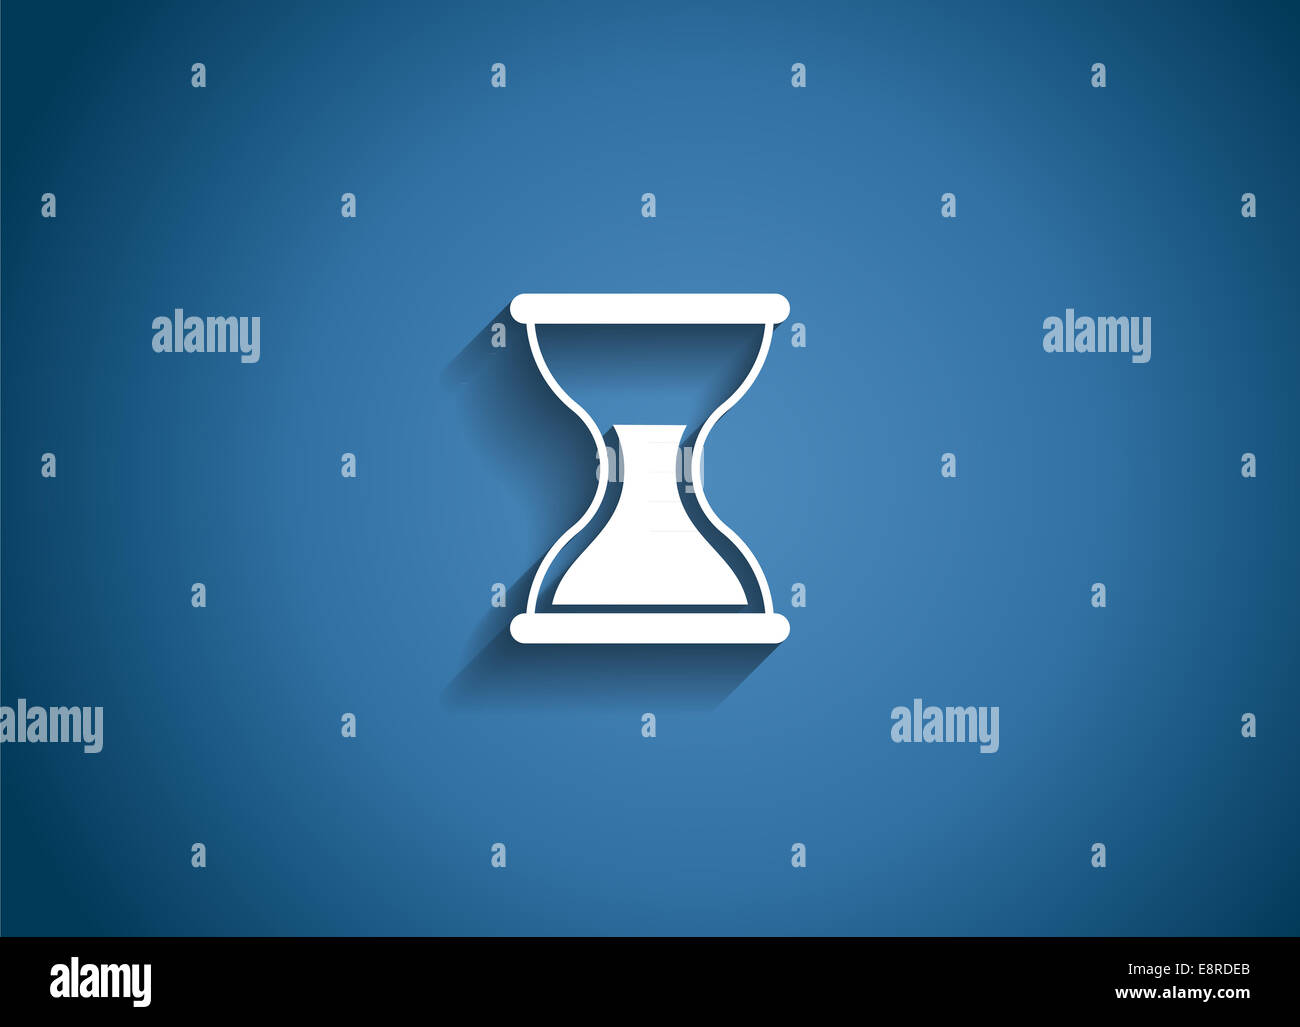 Time Glossy Icon Vector Illustration Stock Photo